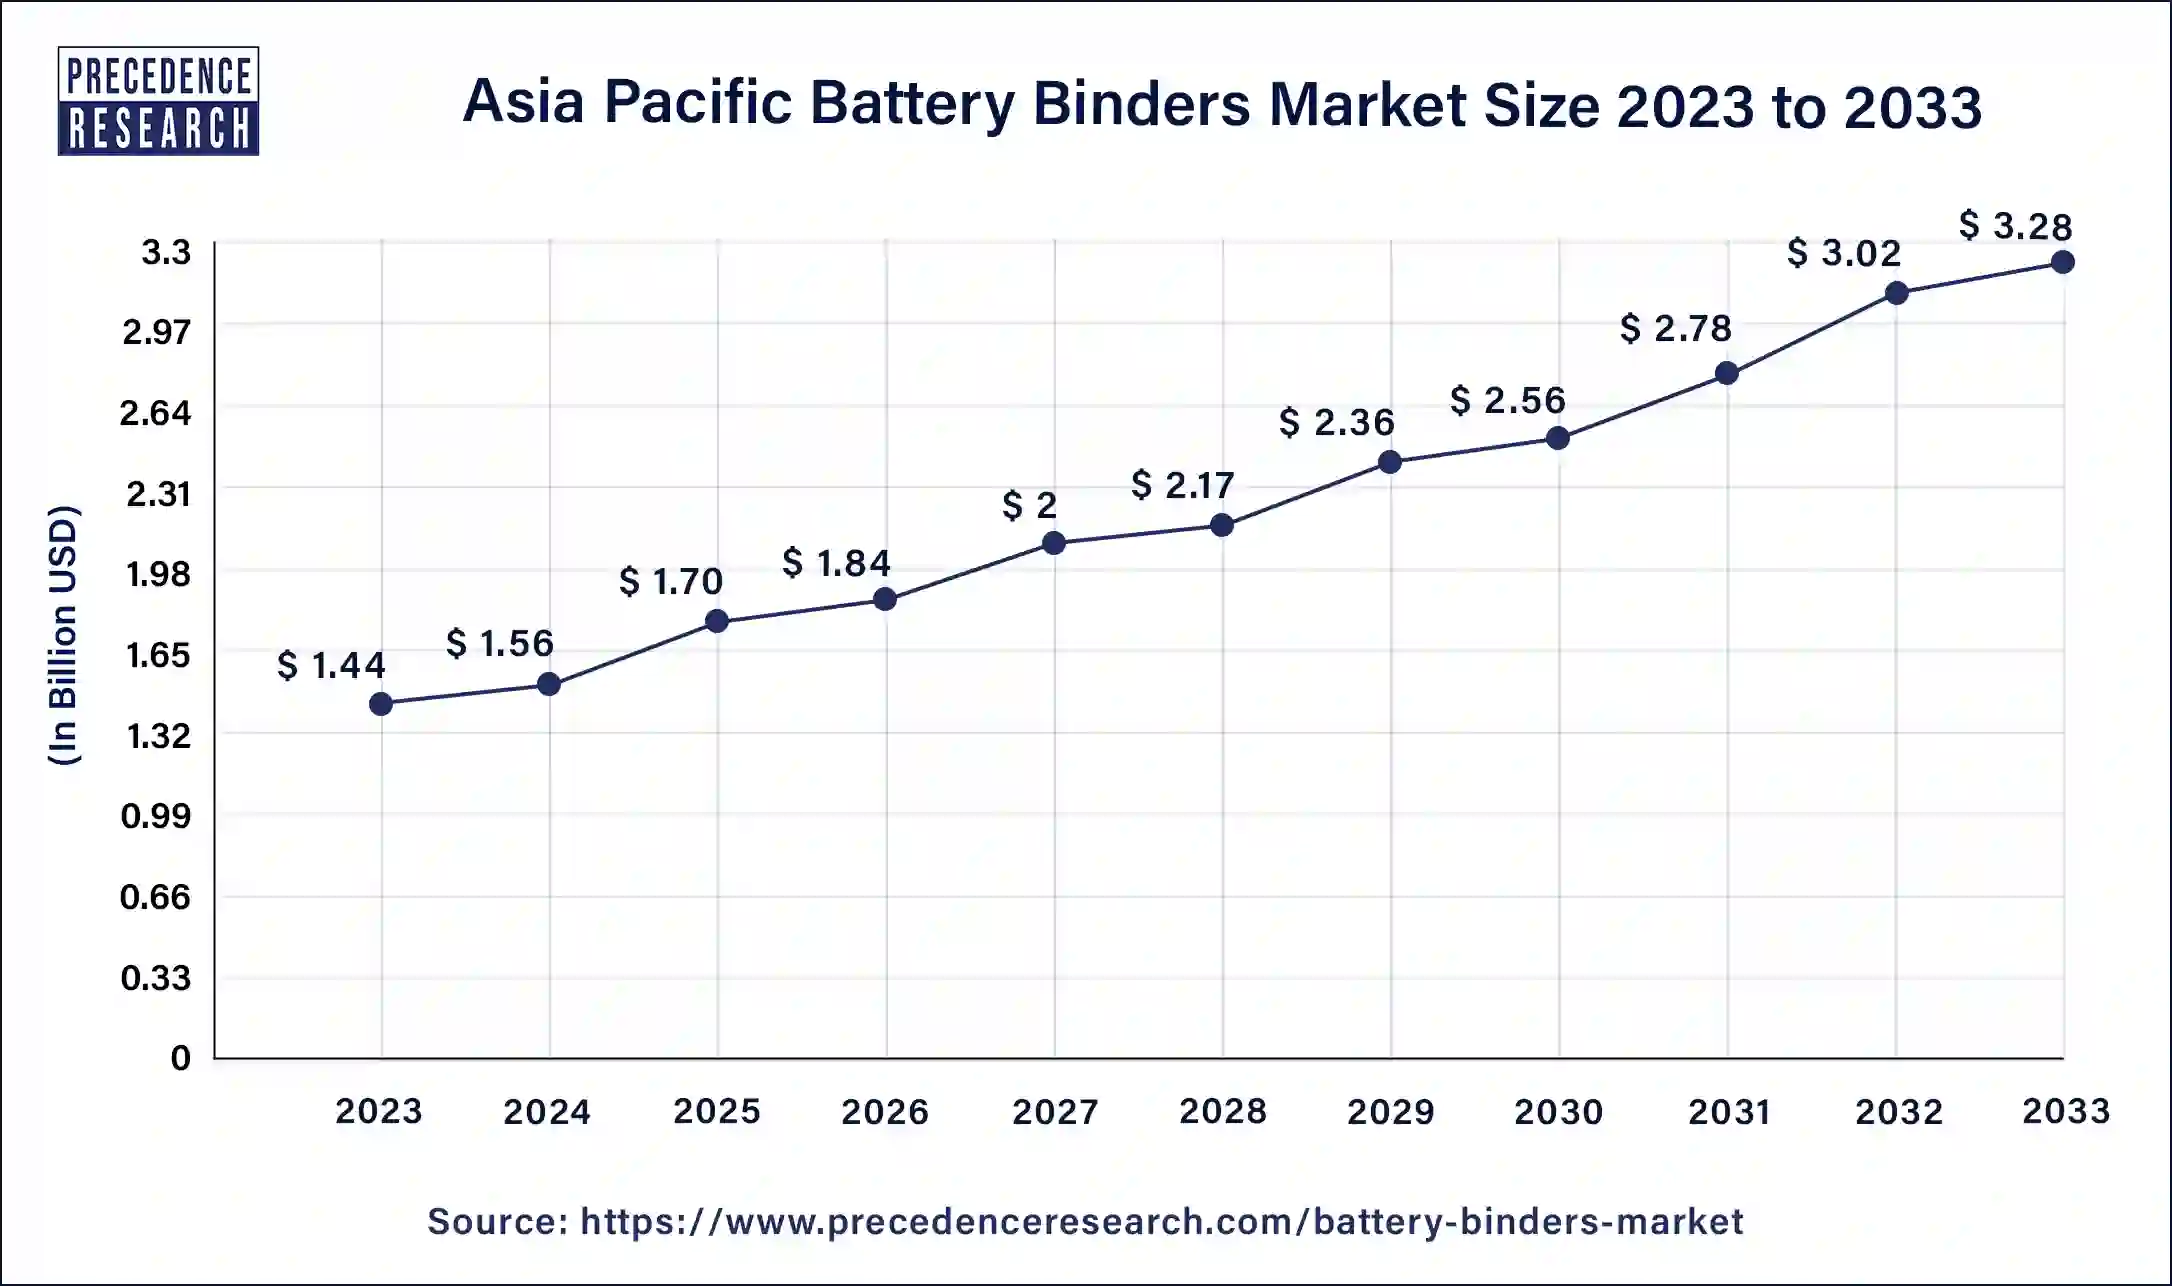 Asia Pacific Battery Binders Market Size 2024 to 2033